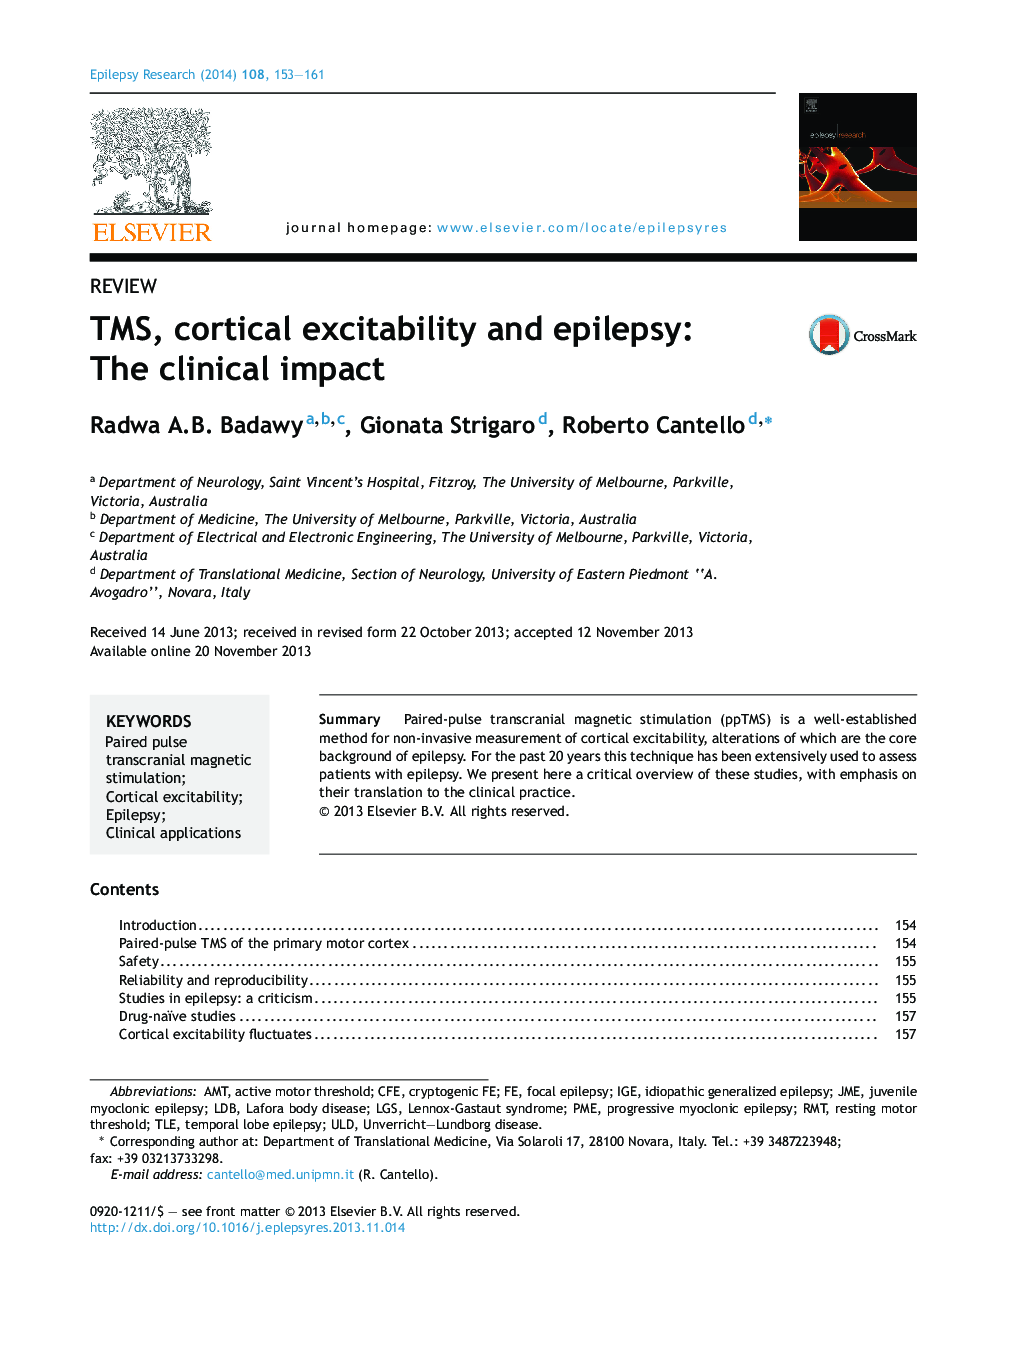 TMS, cortical excitability and epilepsy: The clinical impact